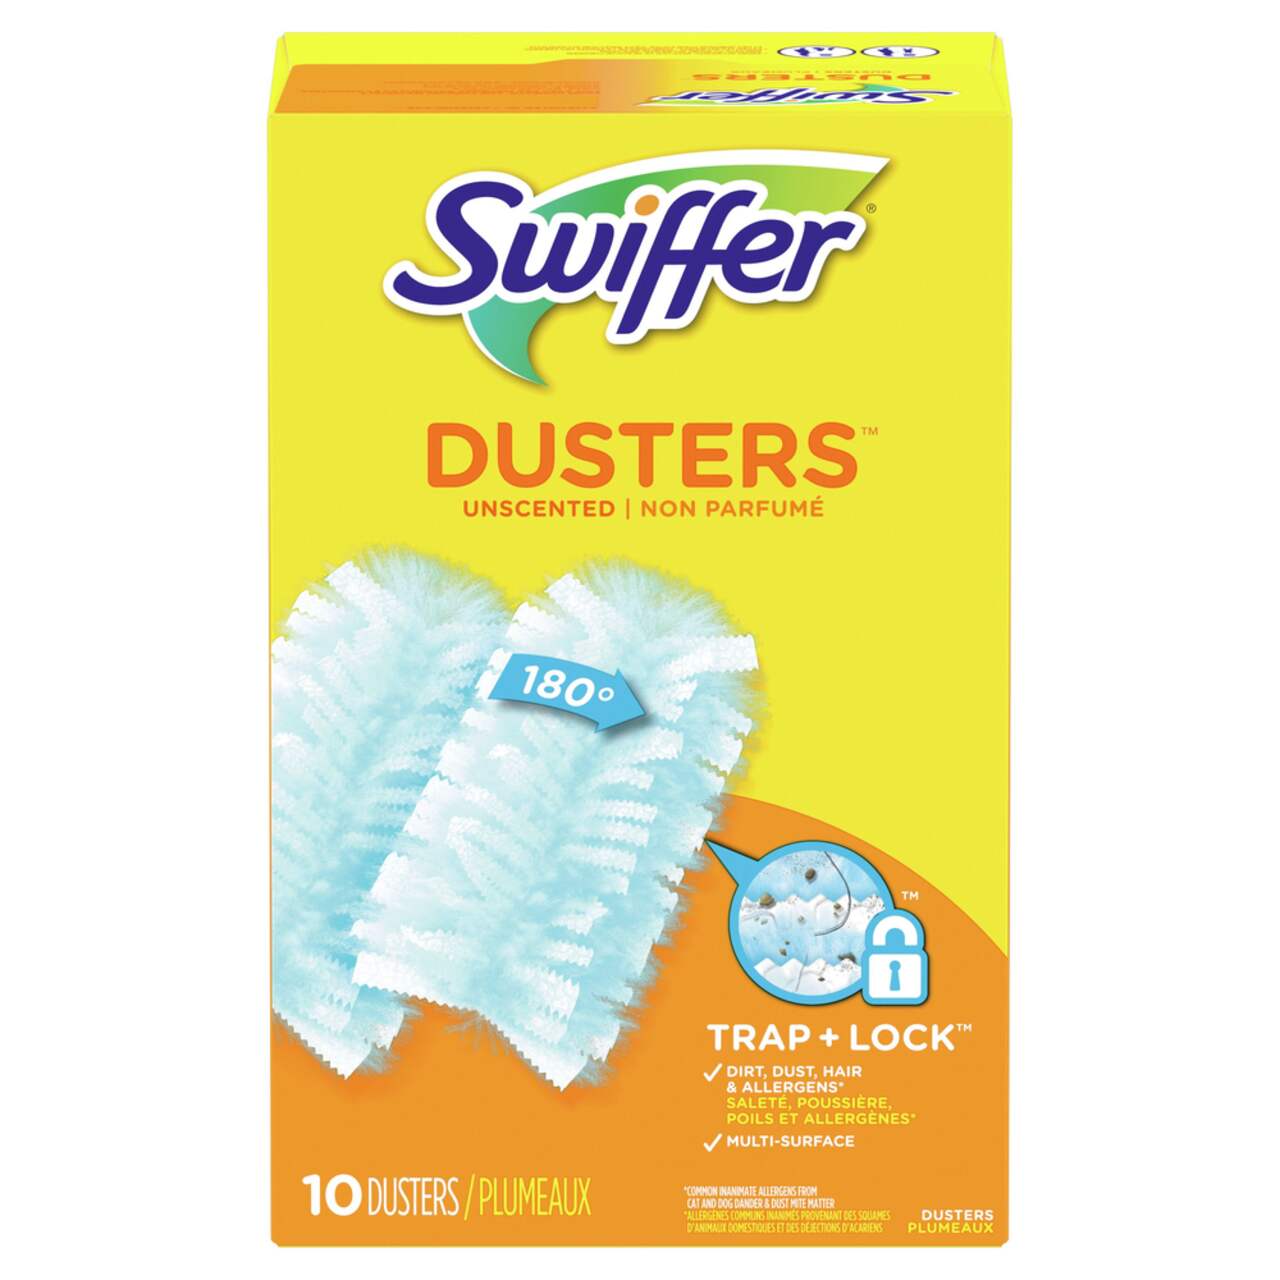 https://media-www.canadiantire.ca/product/living/cleaning/household-cleaning-tools/0427682/swiffer-duster-16count-2797def9-5417-47e0-b9e4-f8c0a34ecf31.png?imdensity=1&imwidth=640&impolicy=mZoom